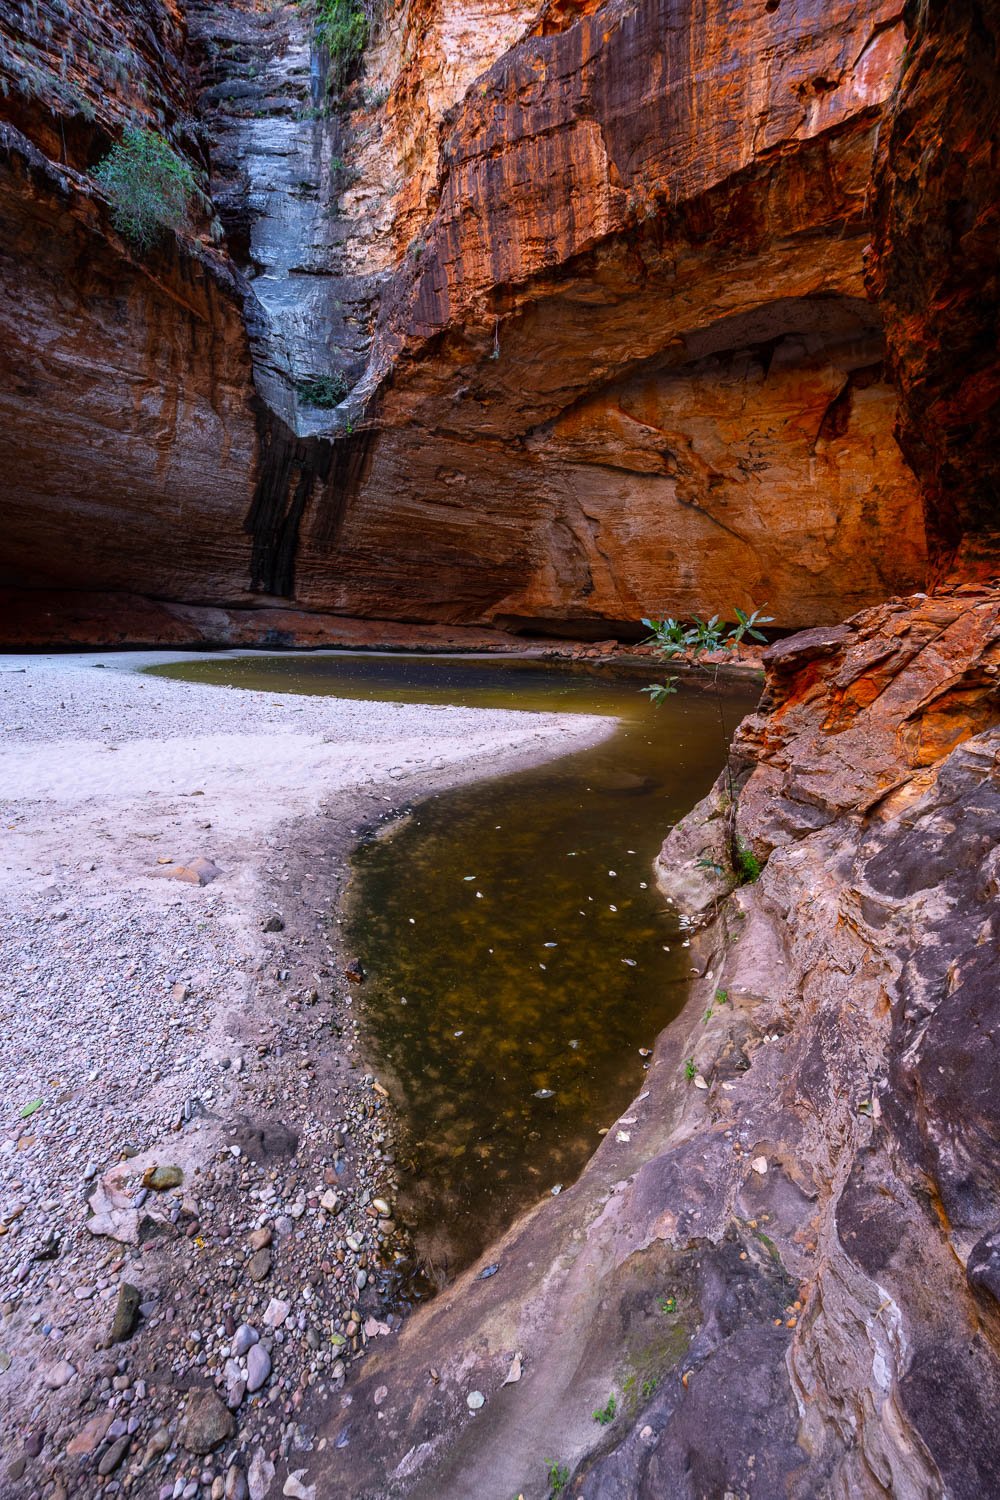 A rocky flat surface with some water on the corner, and a couple of giant mountain walls standing together in the near background, Cathedral Gorge, Purnululu, The Kimberley